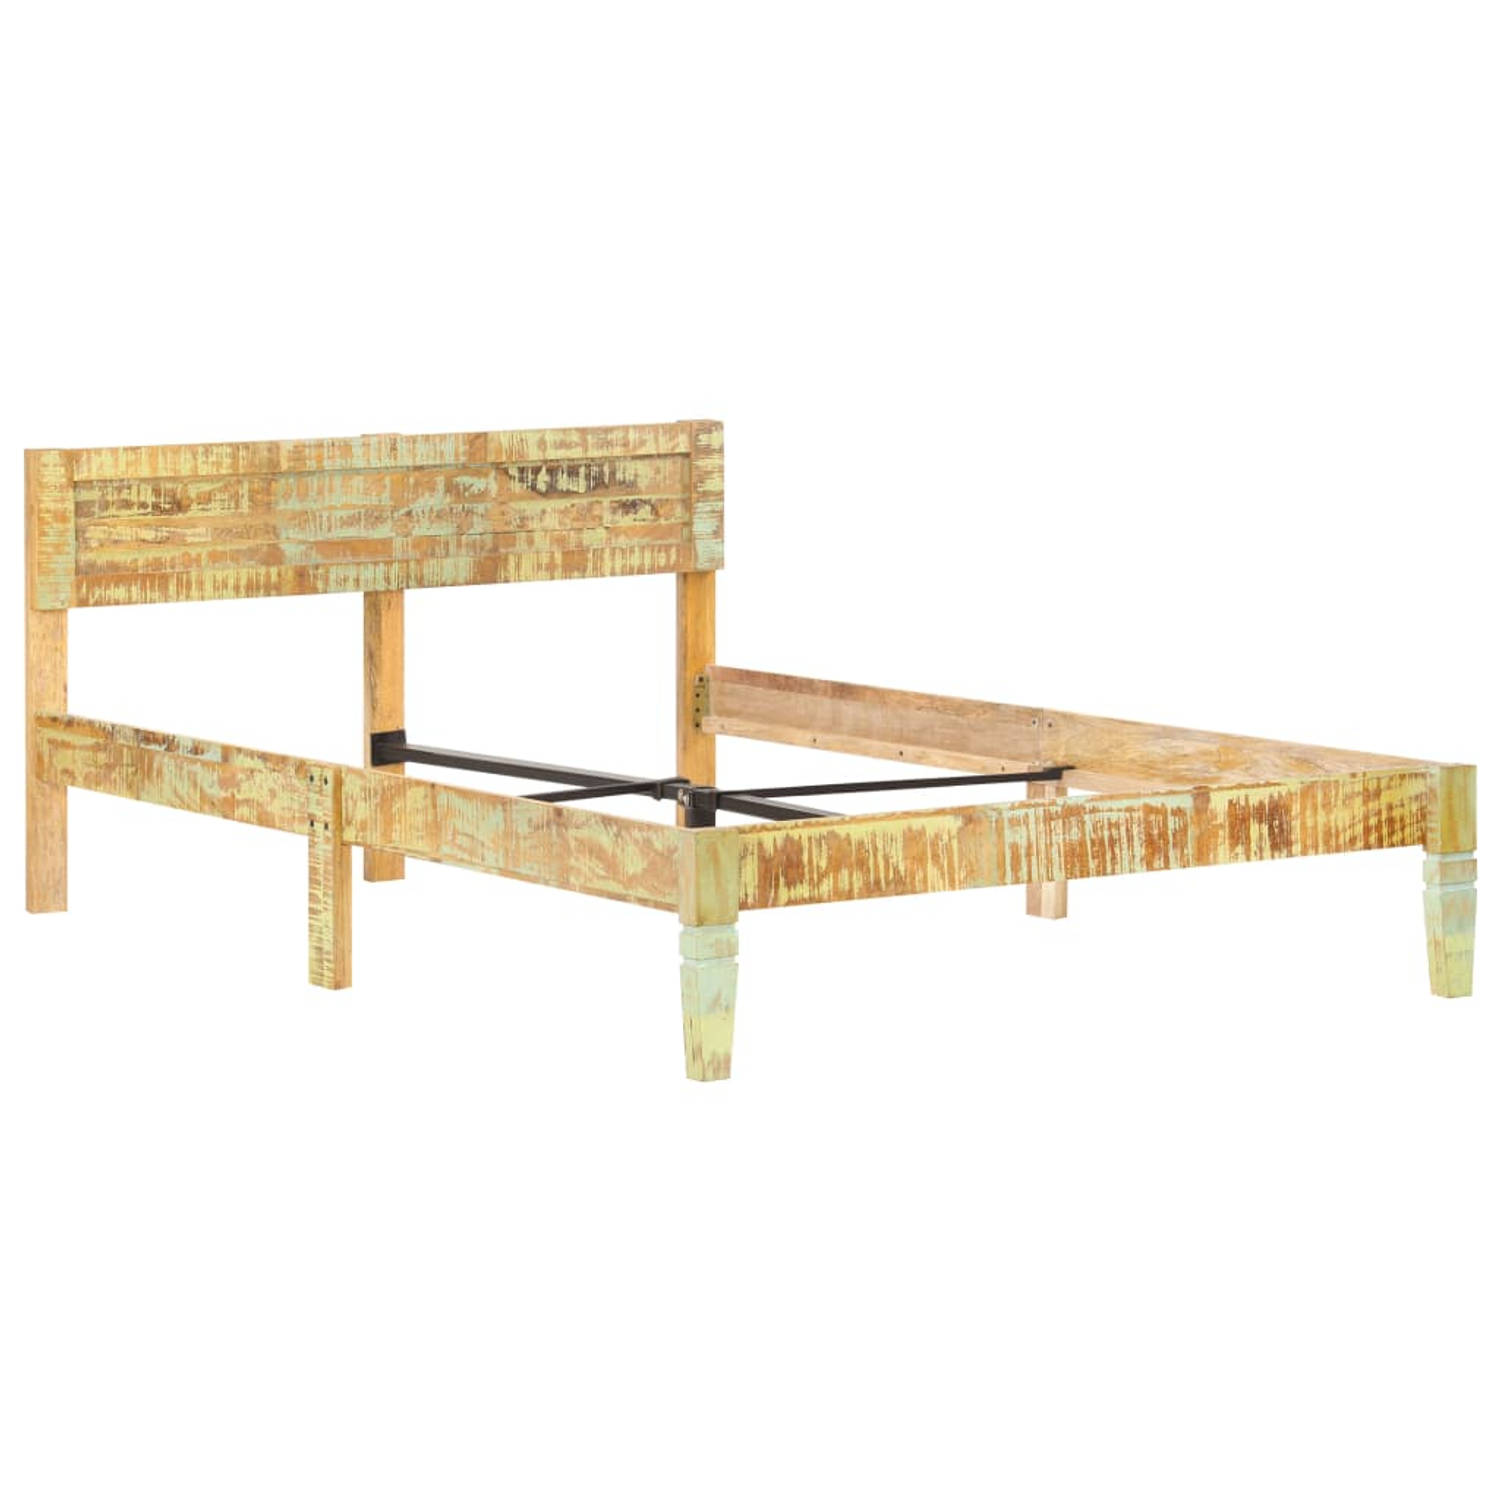 The Living Store Bedframe massief gerecycled hout 120x200 cm - Bedframe - Bedframe - Bed Frame - Bed Frames - Bed - Bedden - 2-persoonsbed - 2-persoonsbedden - Tweepersoons Bed